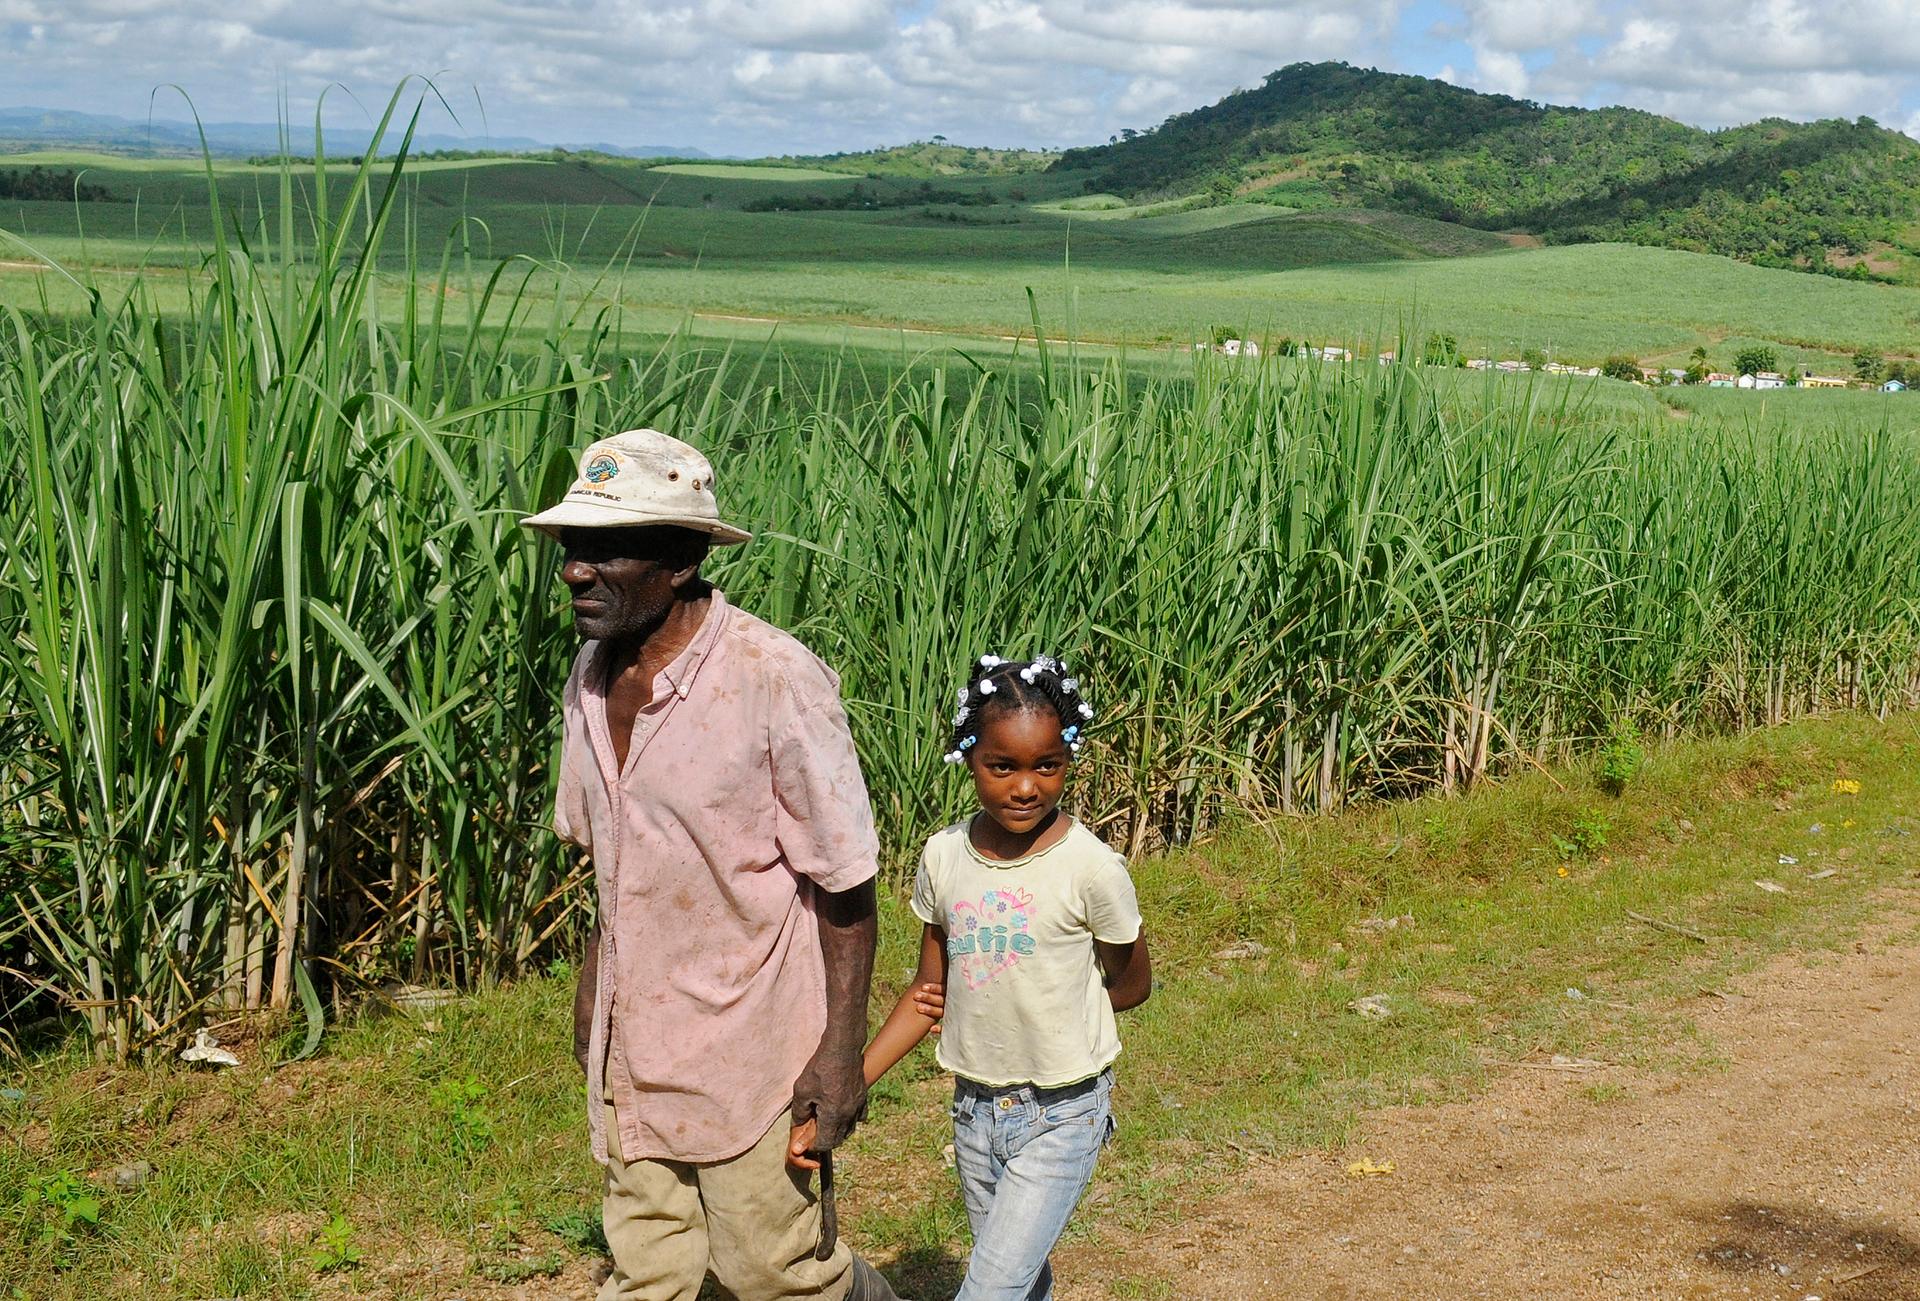 Leguisie Louis (L), a farmer, was born in Haiti but moved to the Dominican Republic in 1959. He's seen here walking with his granddaughter, Maxileidy. A  court ruling retroactively denies Dominican nationality to anyone born after 1929 who does not have a